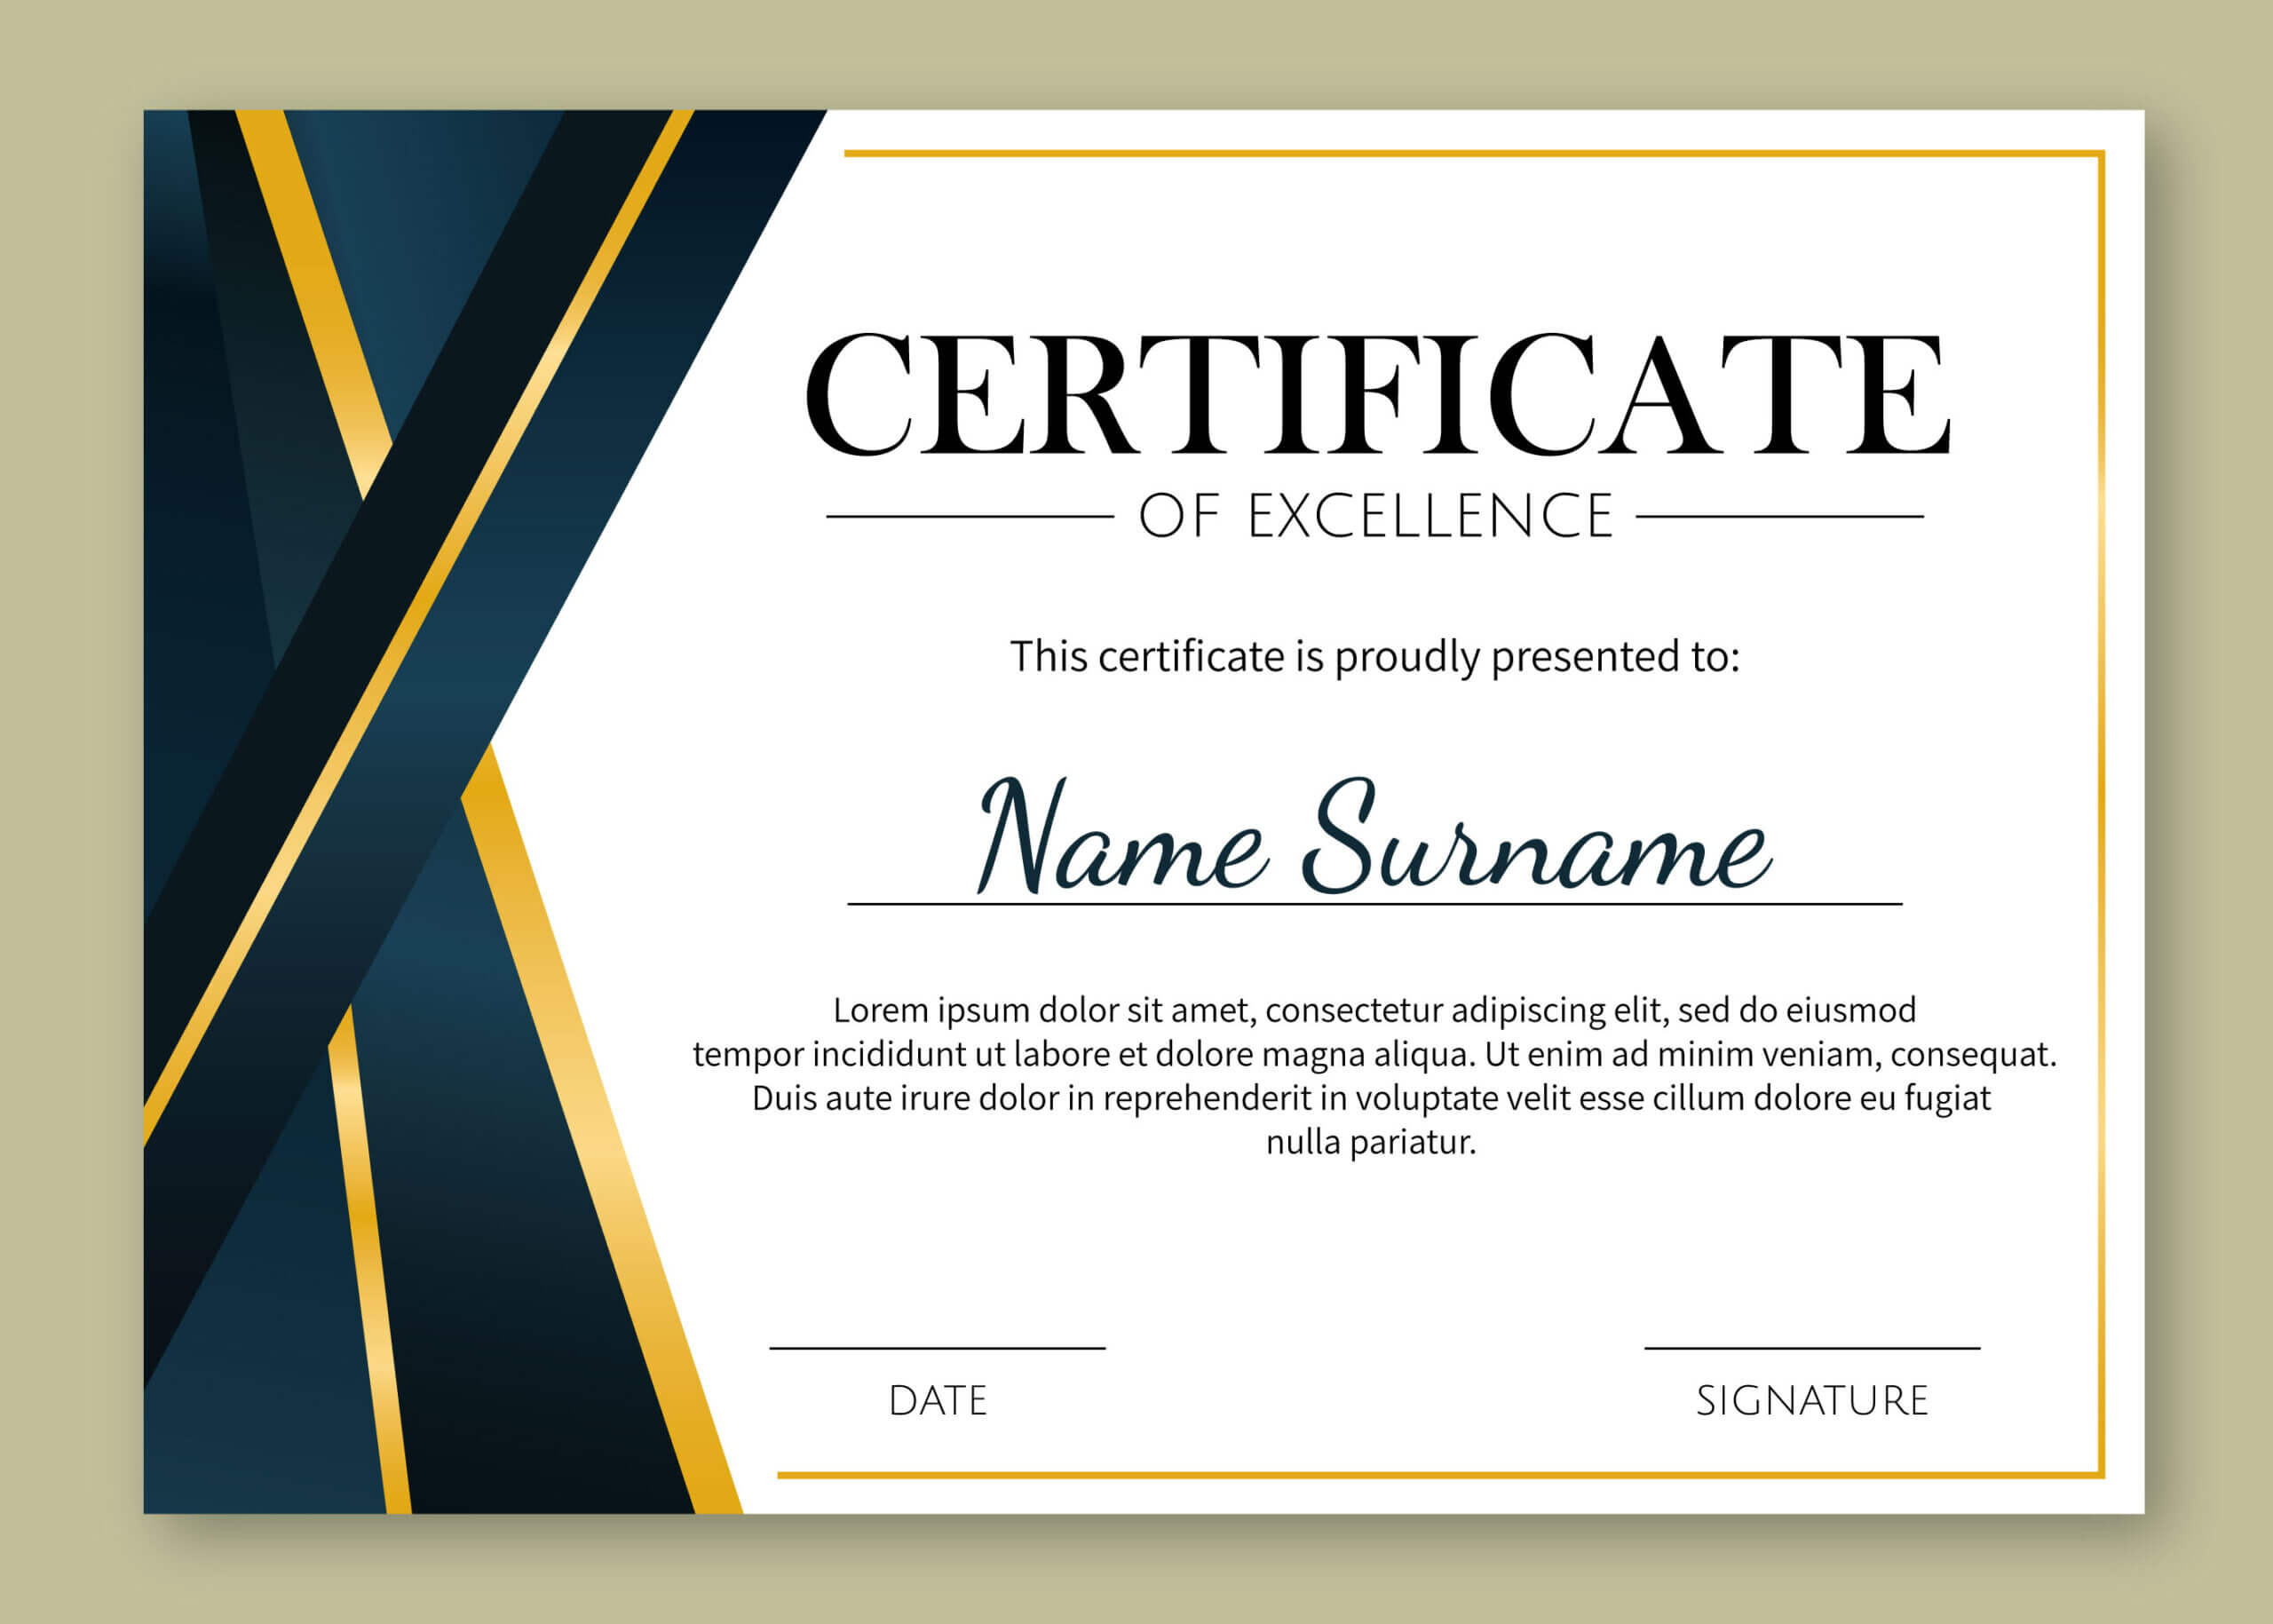 Certificate Of Excellence Template Free Download Intended For Certificate Of Excellence Template Free Download